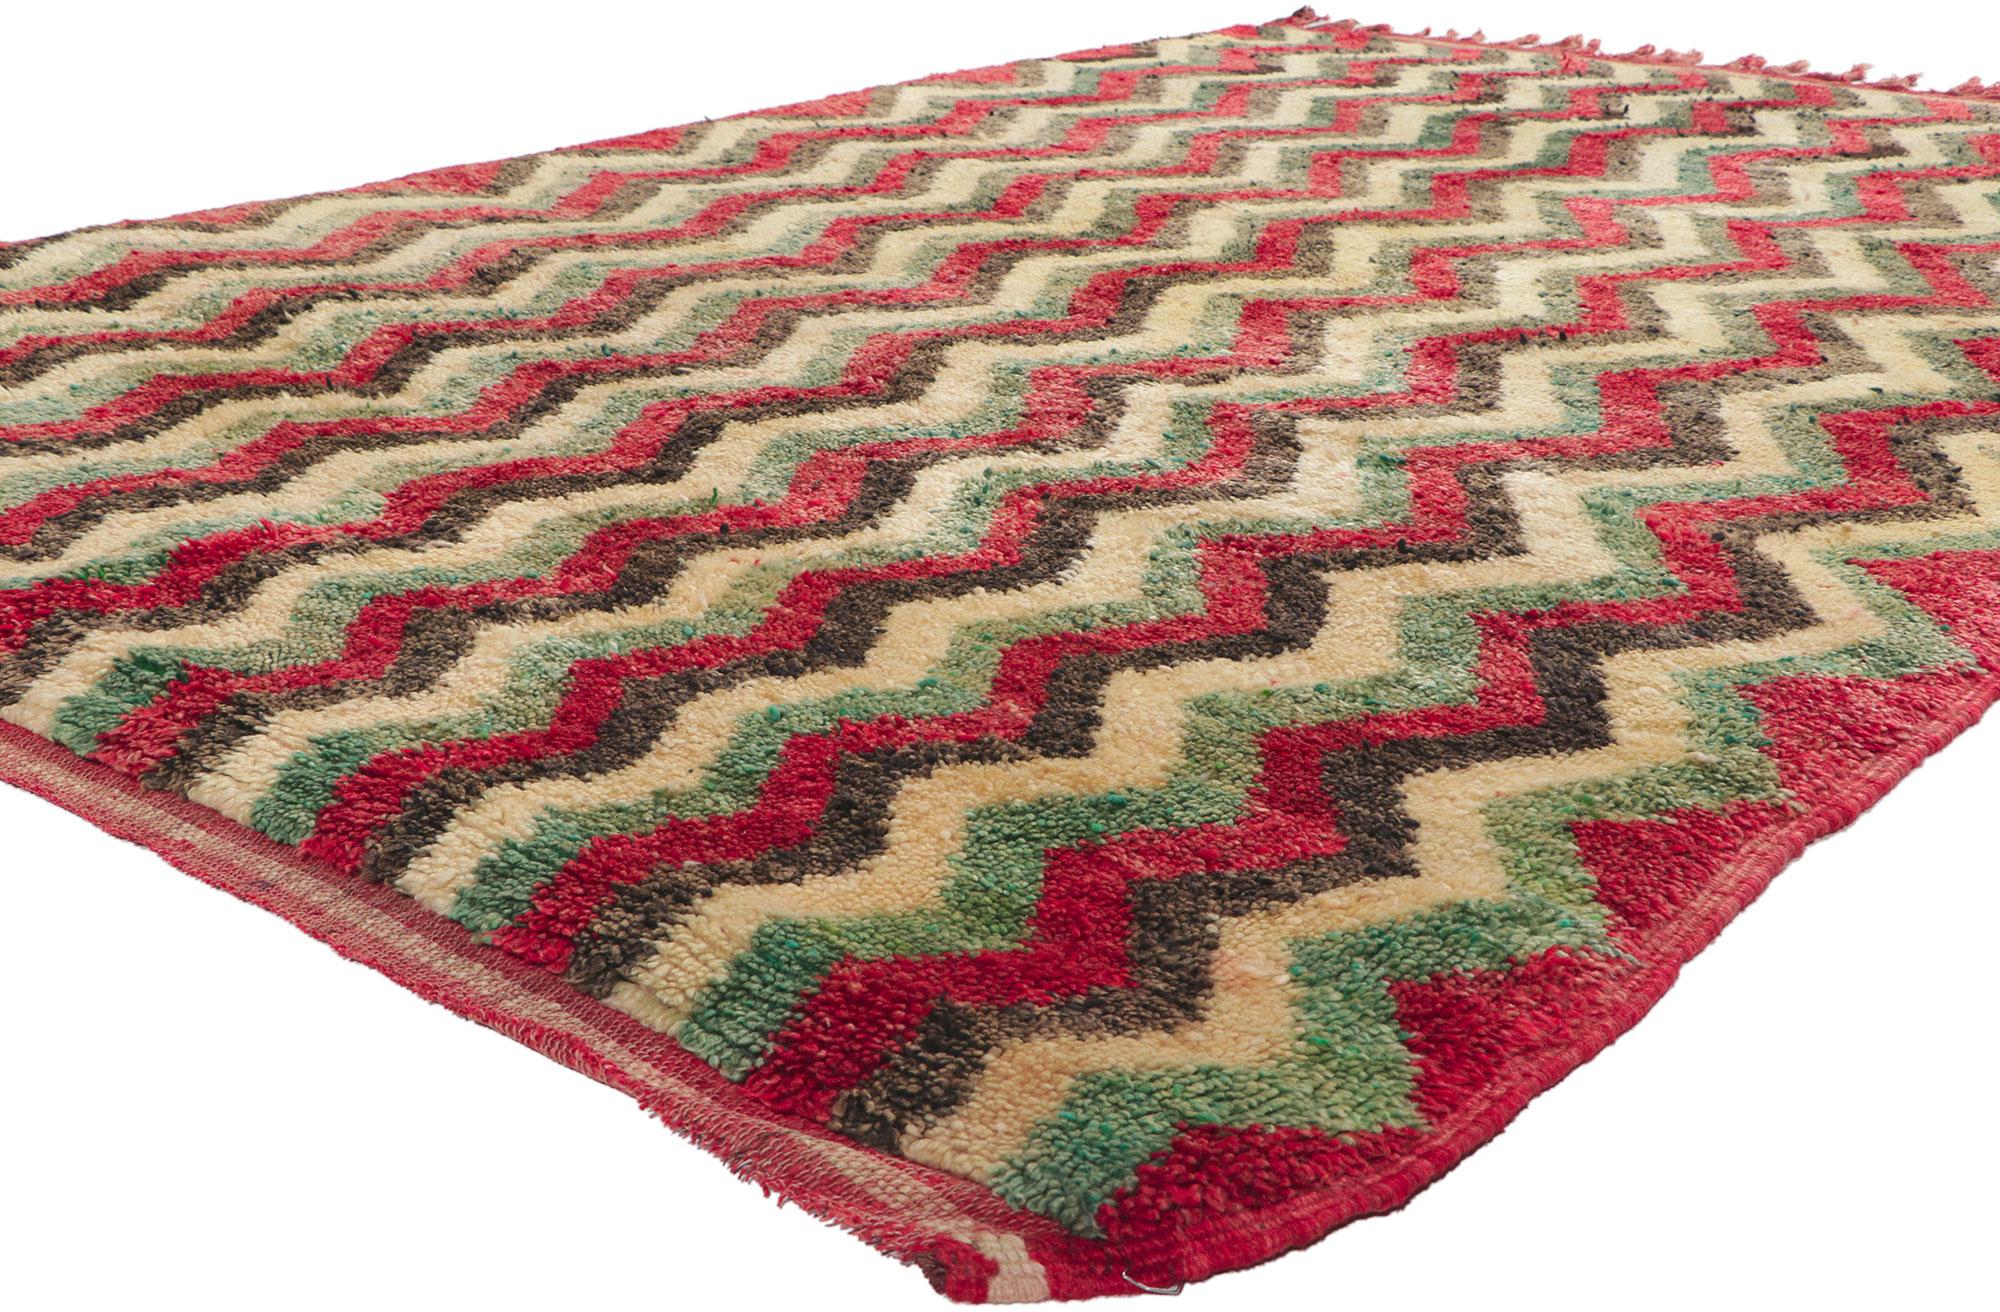 78375 vintage Moroccan Beni Ourain rug, 06'10 x 10'00. With its plush pile, incredible detail and texture, this hand knotted wool vintage Moroccan Beni Ourain rug is a captivating vision of woven beauty. The eye-catching chevron pattern and lively